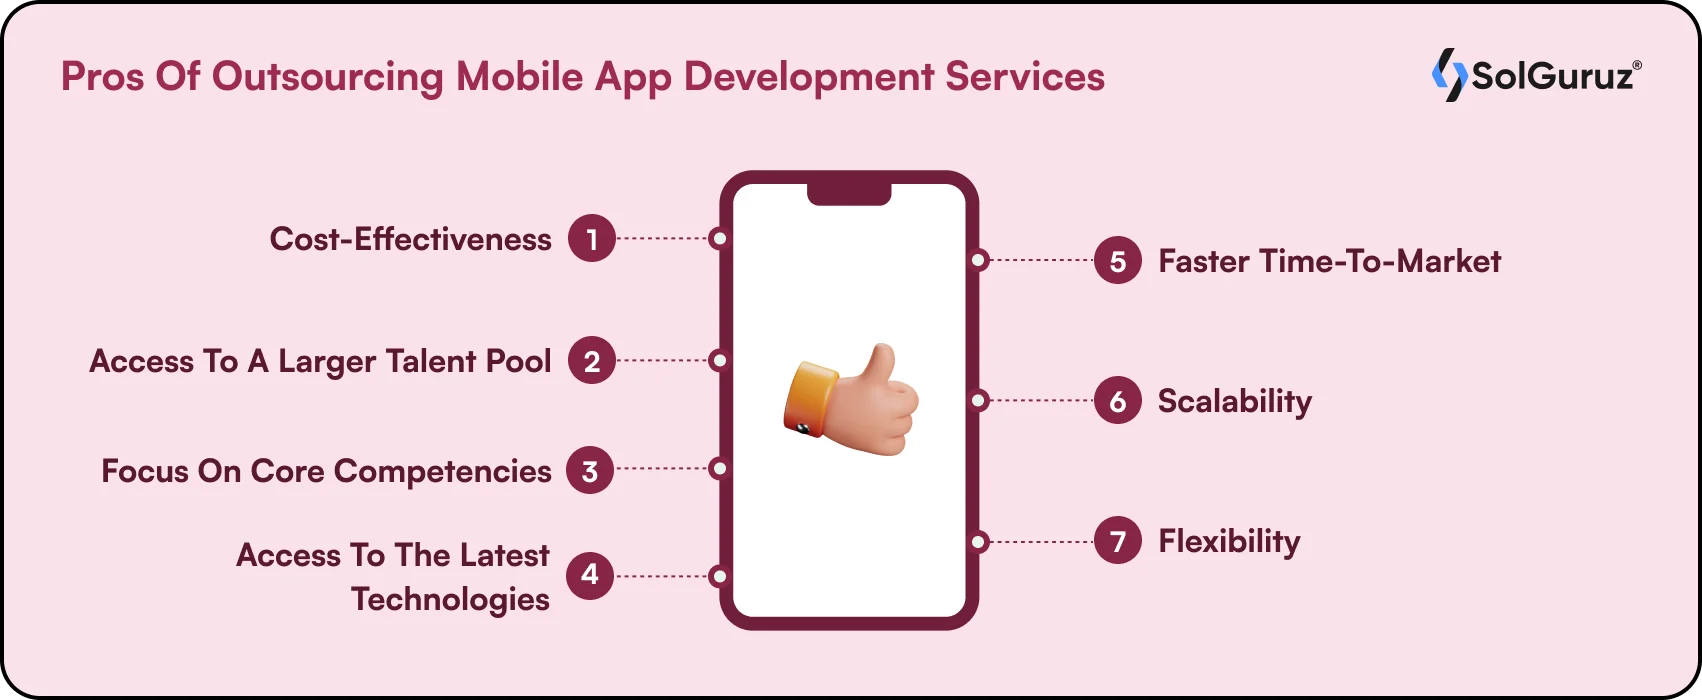 Pros Of Outsourcing Mobile App Development Services